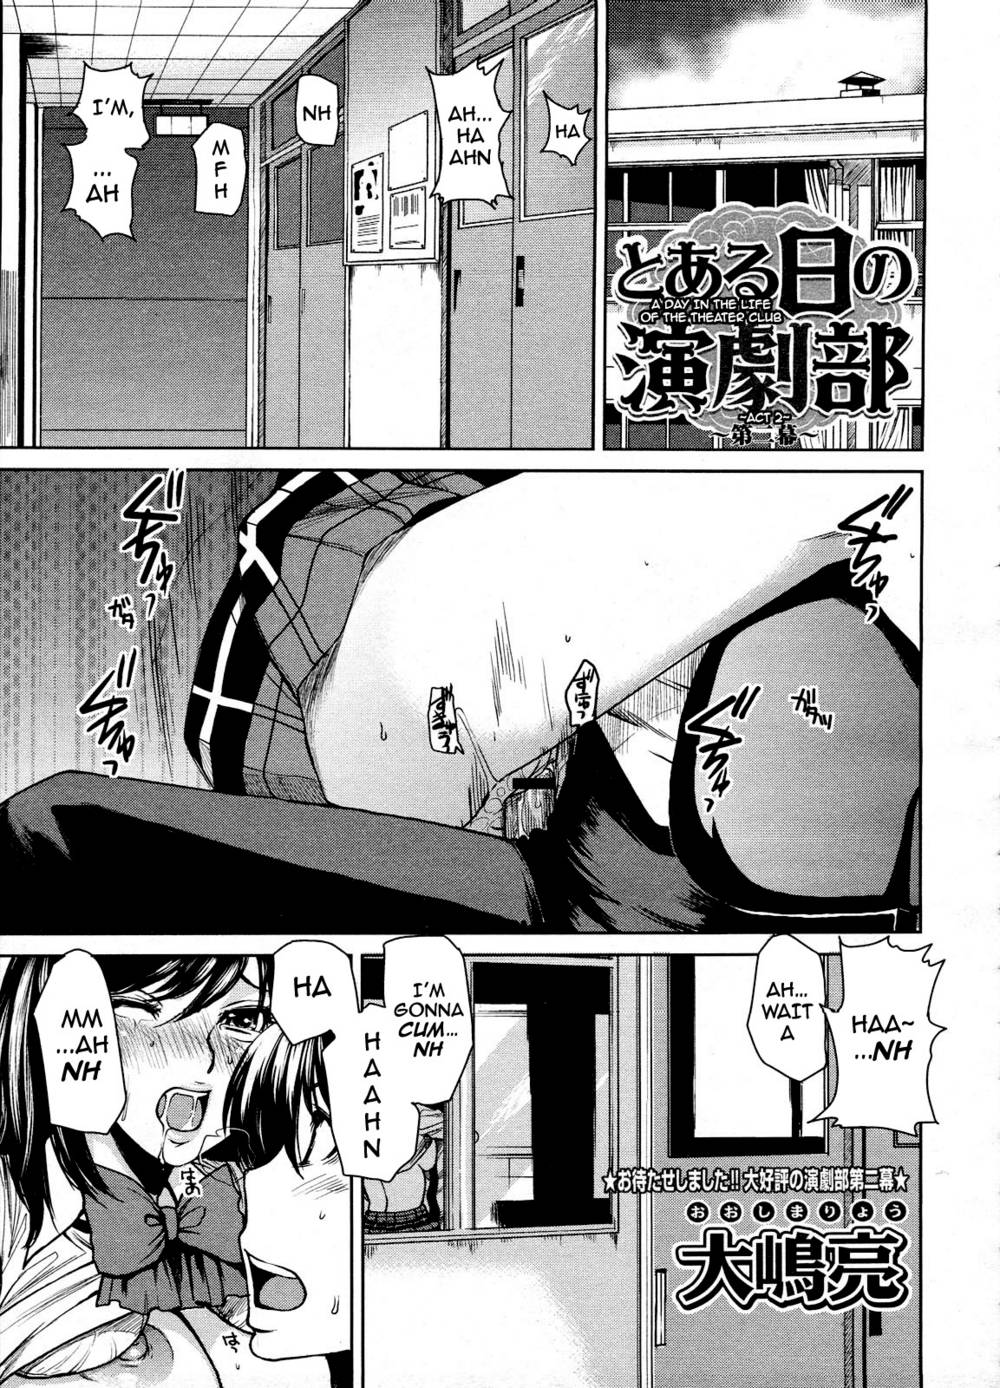 Hentai Manga Comic-A Day in the Life of the Theater Club-Chapter 2-1